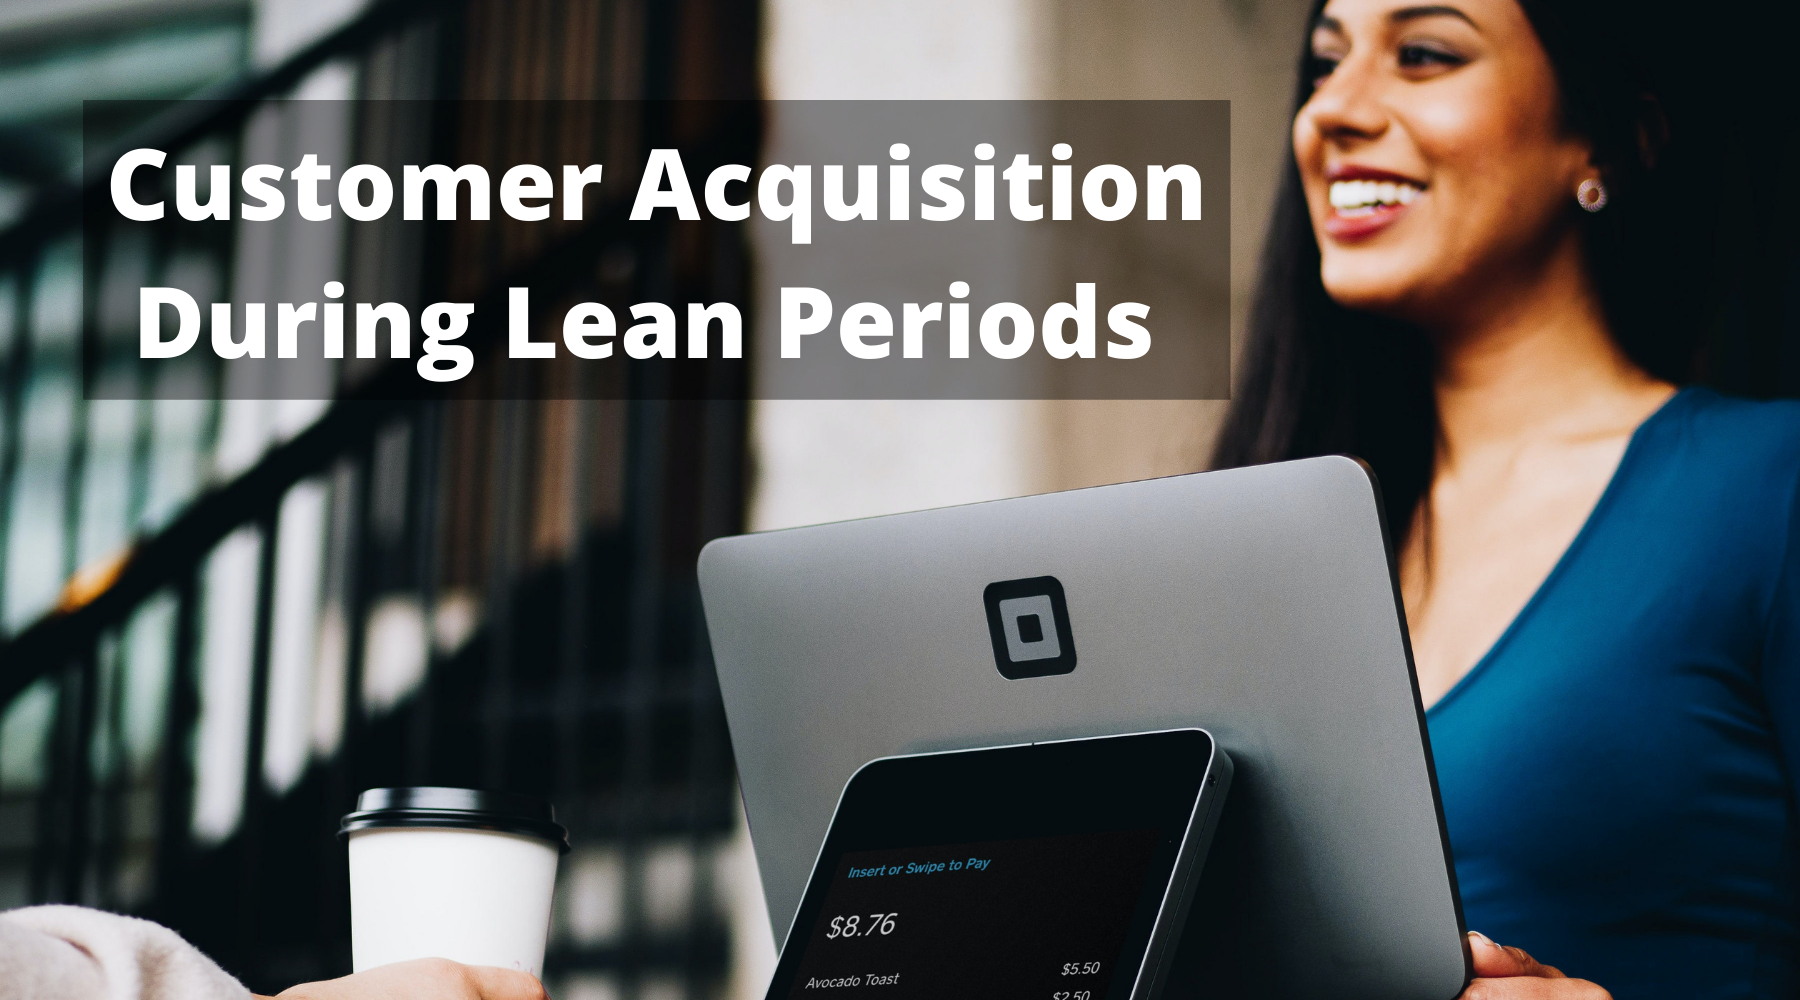 How to Boost Customer Acquisition During Lean Periods